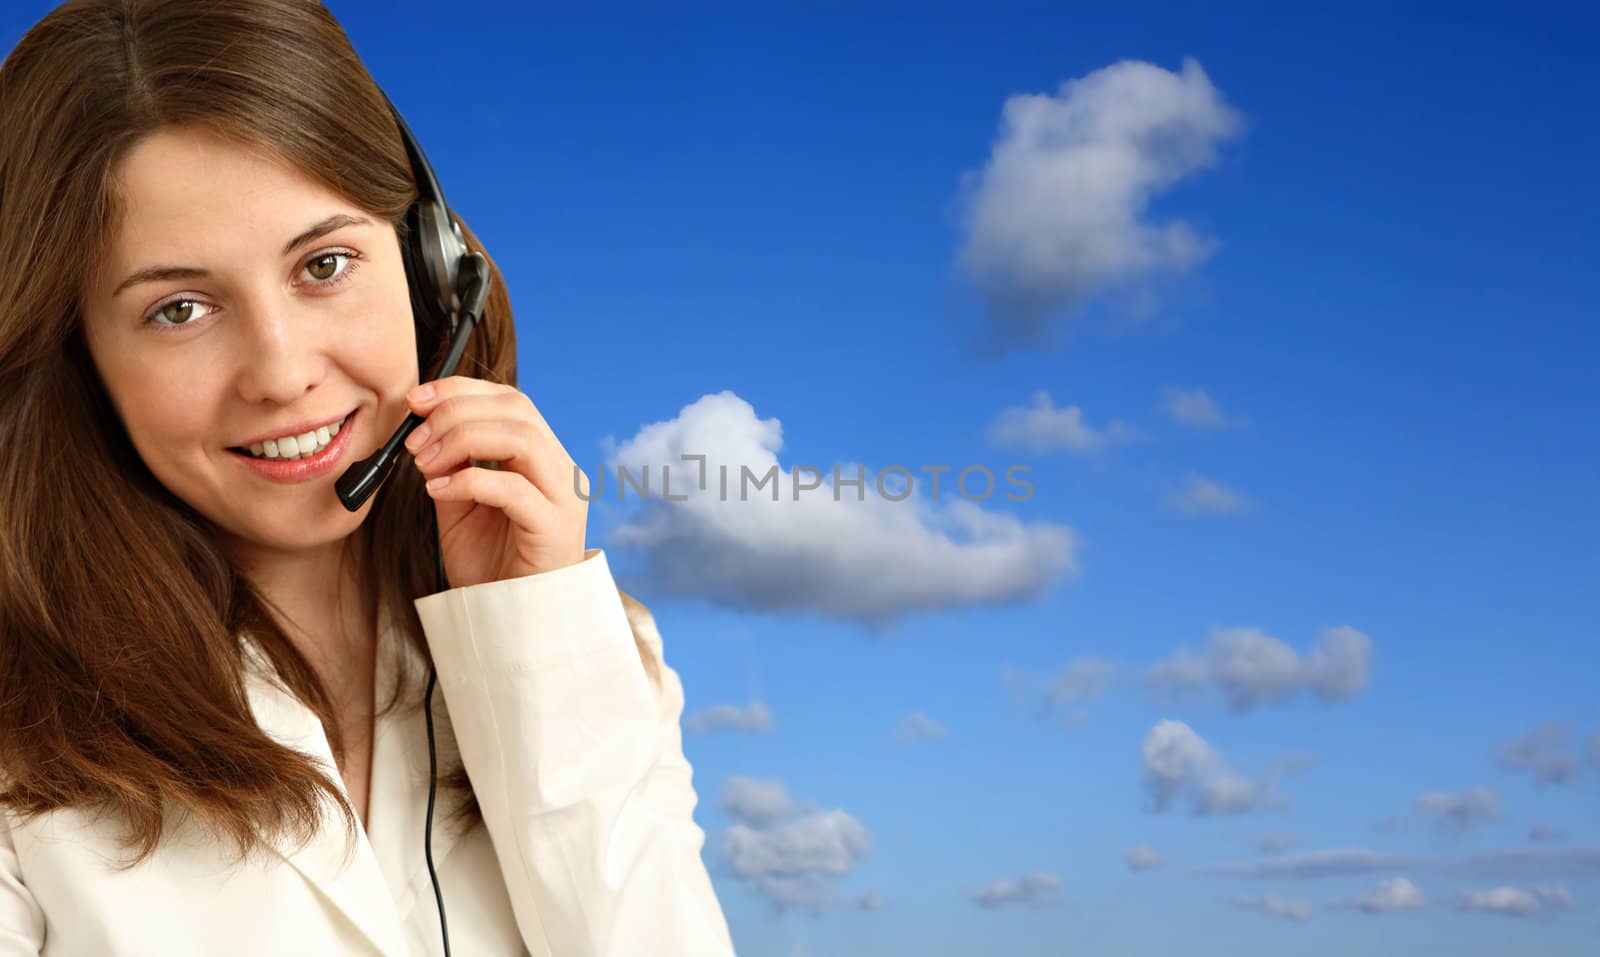 Smiling pretty business woman with headset
